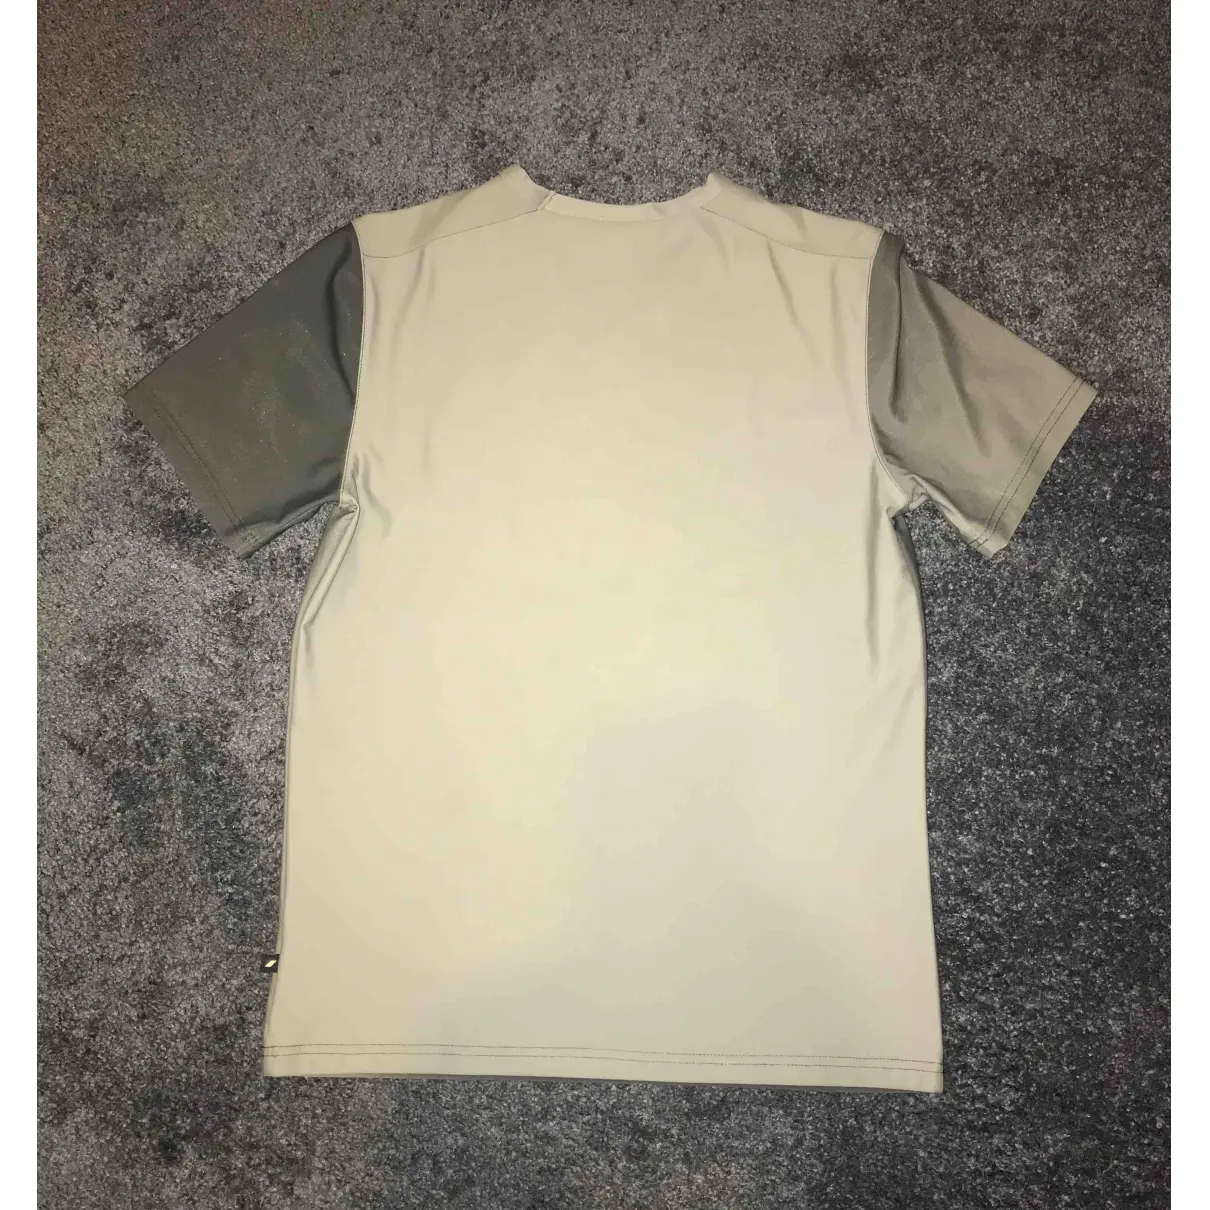 Dkny T-shirt for sale